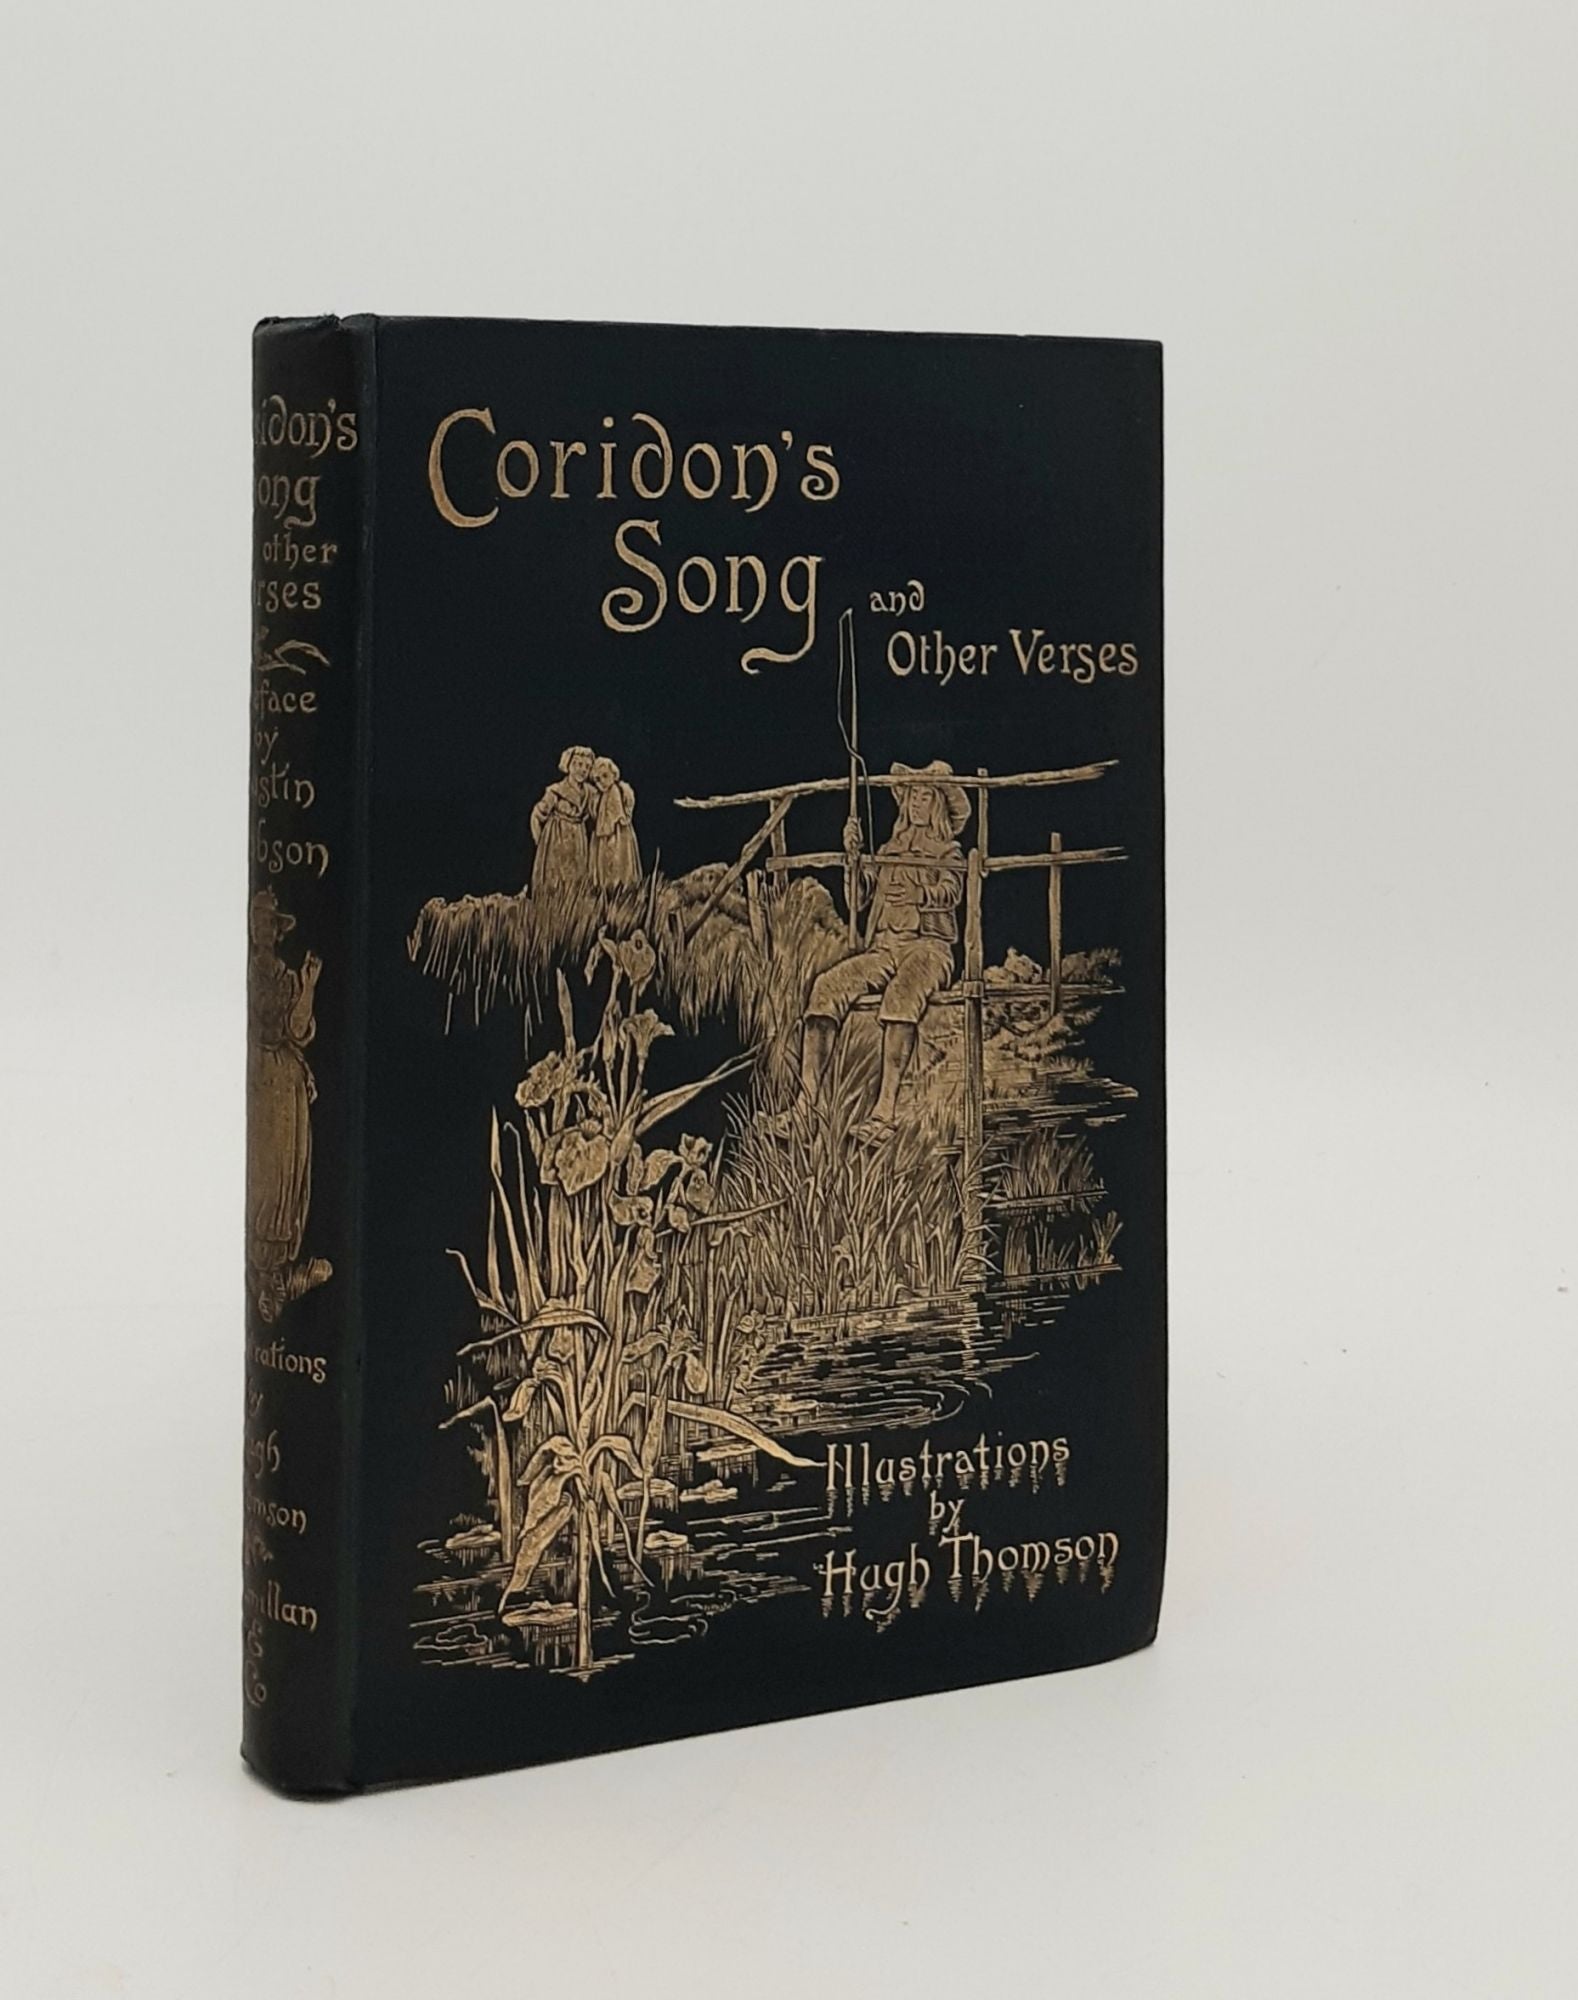 DOBSON Austin, THOMSON Hugh [Illustrator] - Coridon's Song and Other Verses from Various Sources